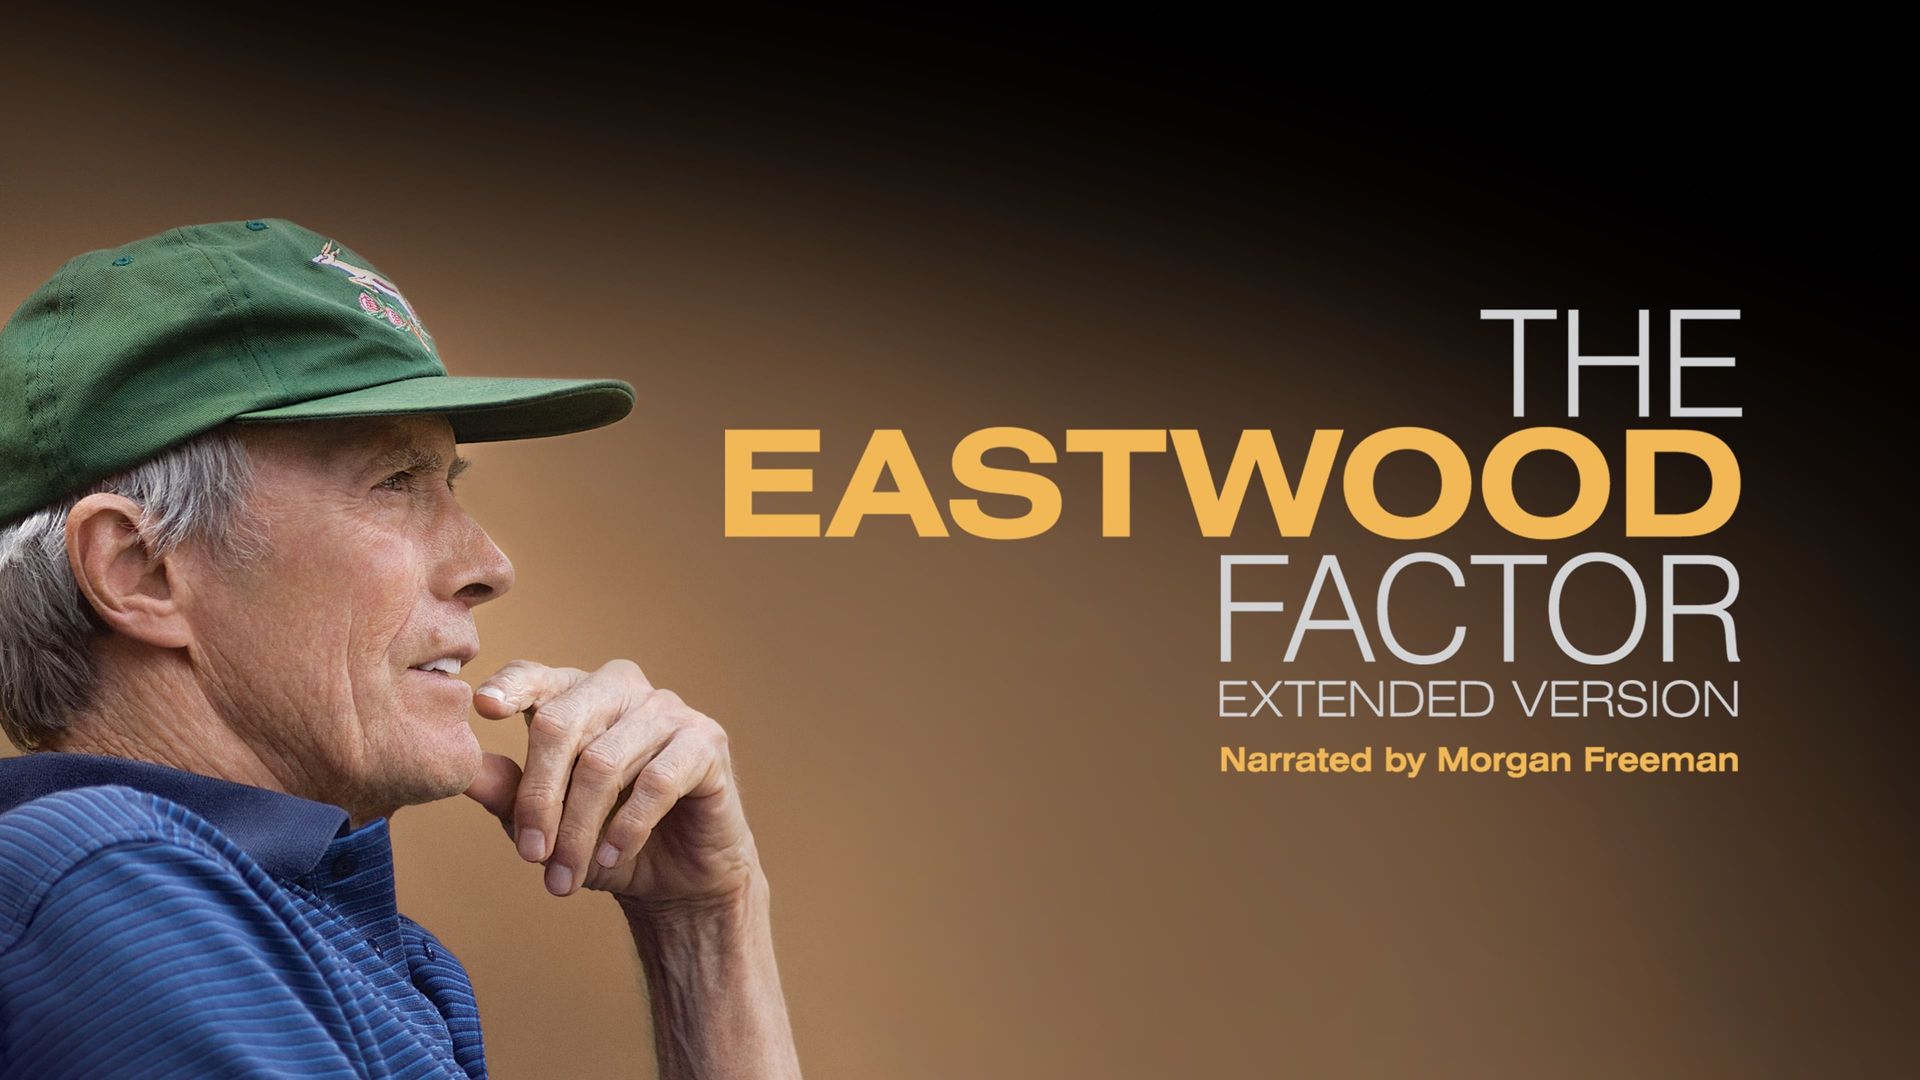 The Eastwood Factor background